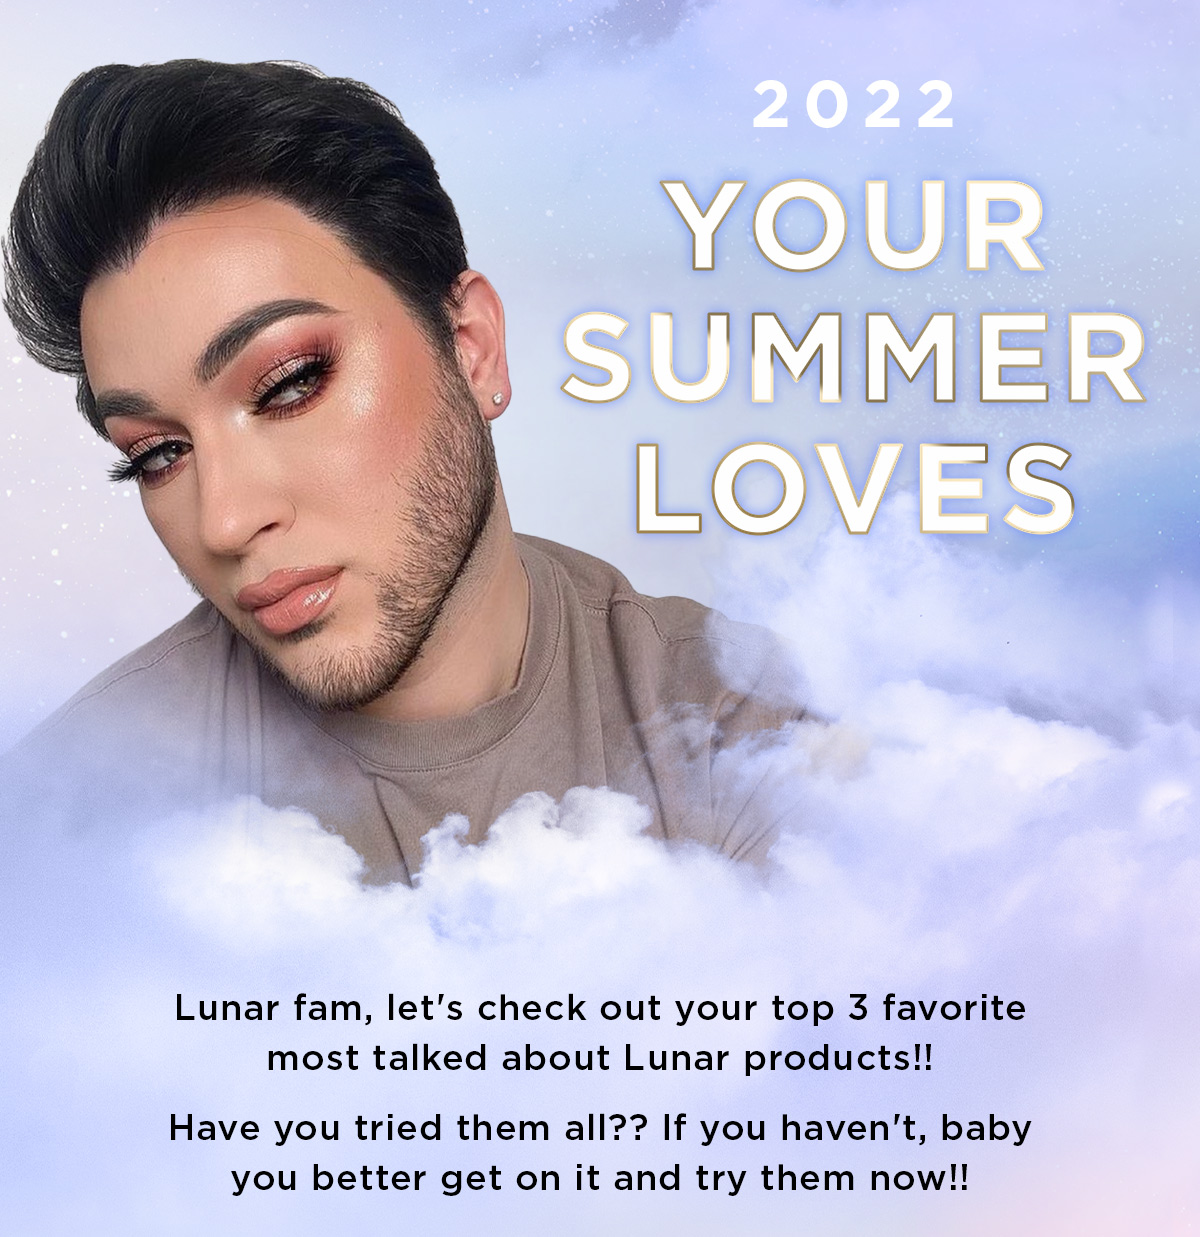  Y@ LUJ K SUMMER EOAVA SRS Lunar fam, let's check out your top 3 favorite most talked about Lunar products!! Have you tried them all?? If you haven't, baby you better get on it and try them now!! 